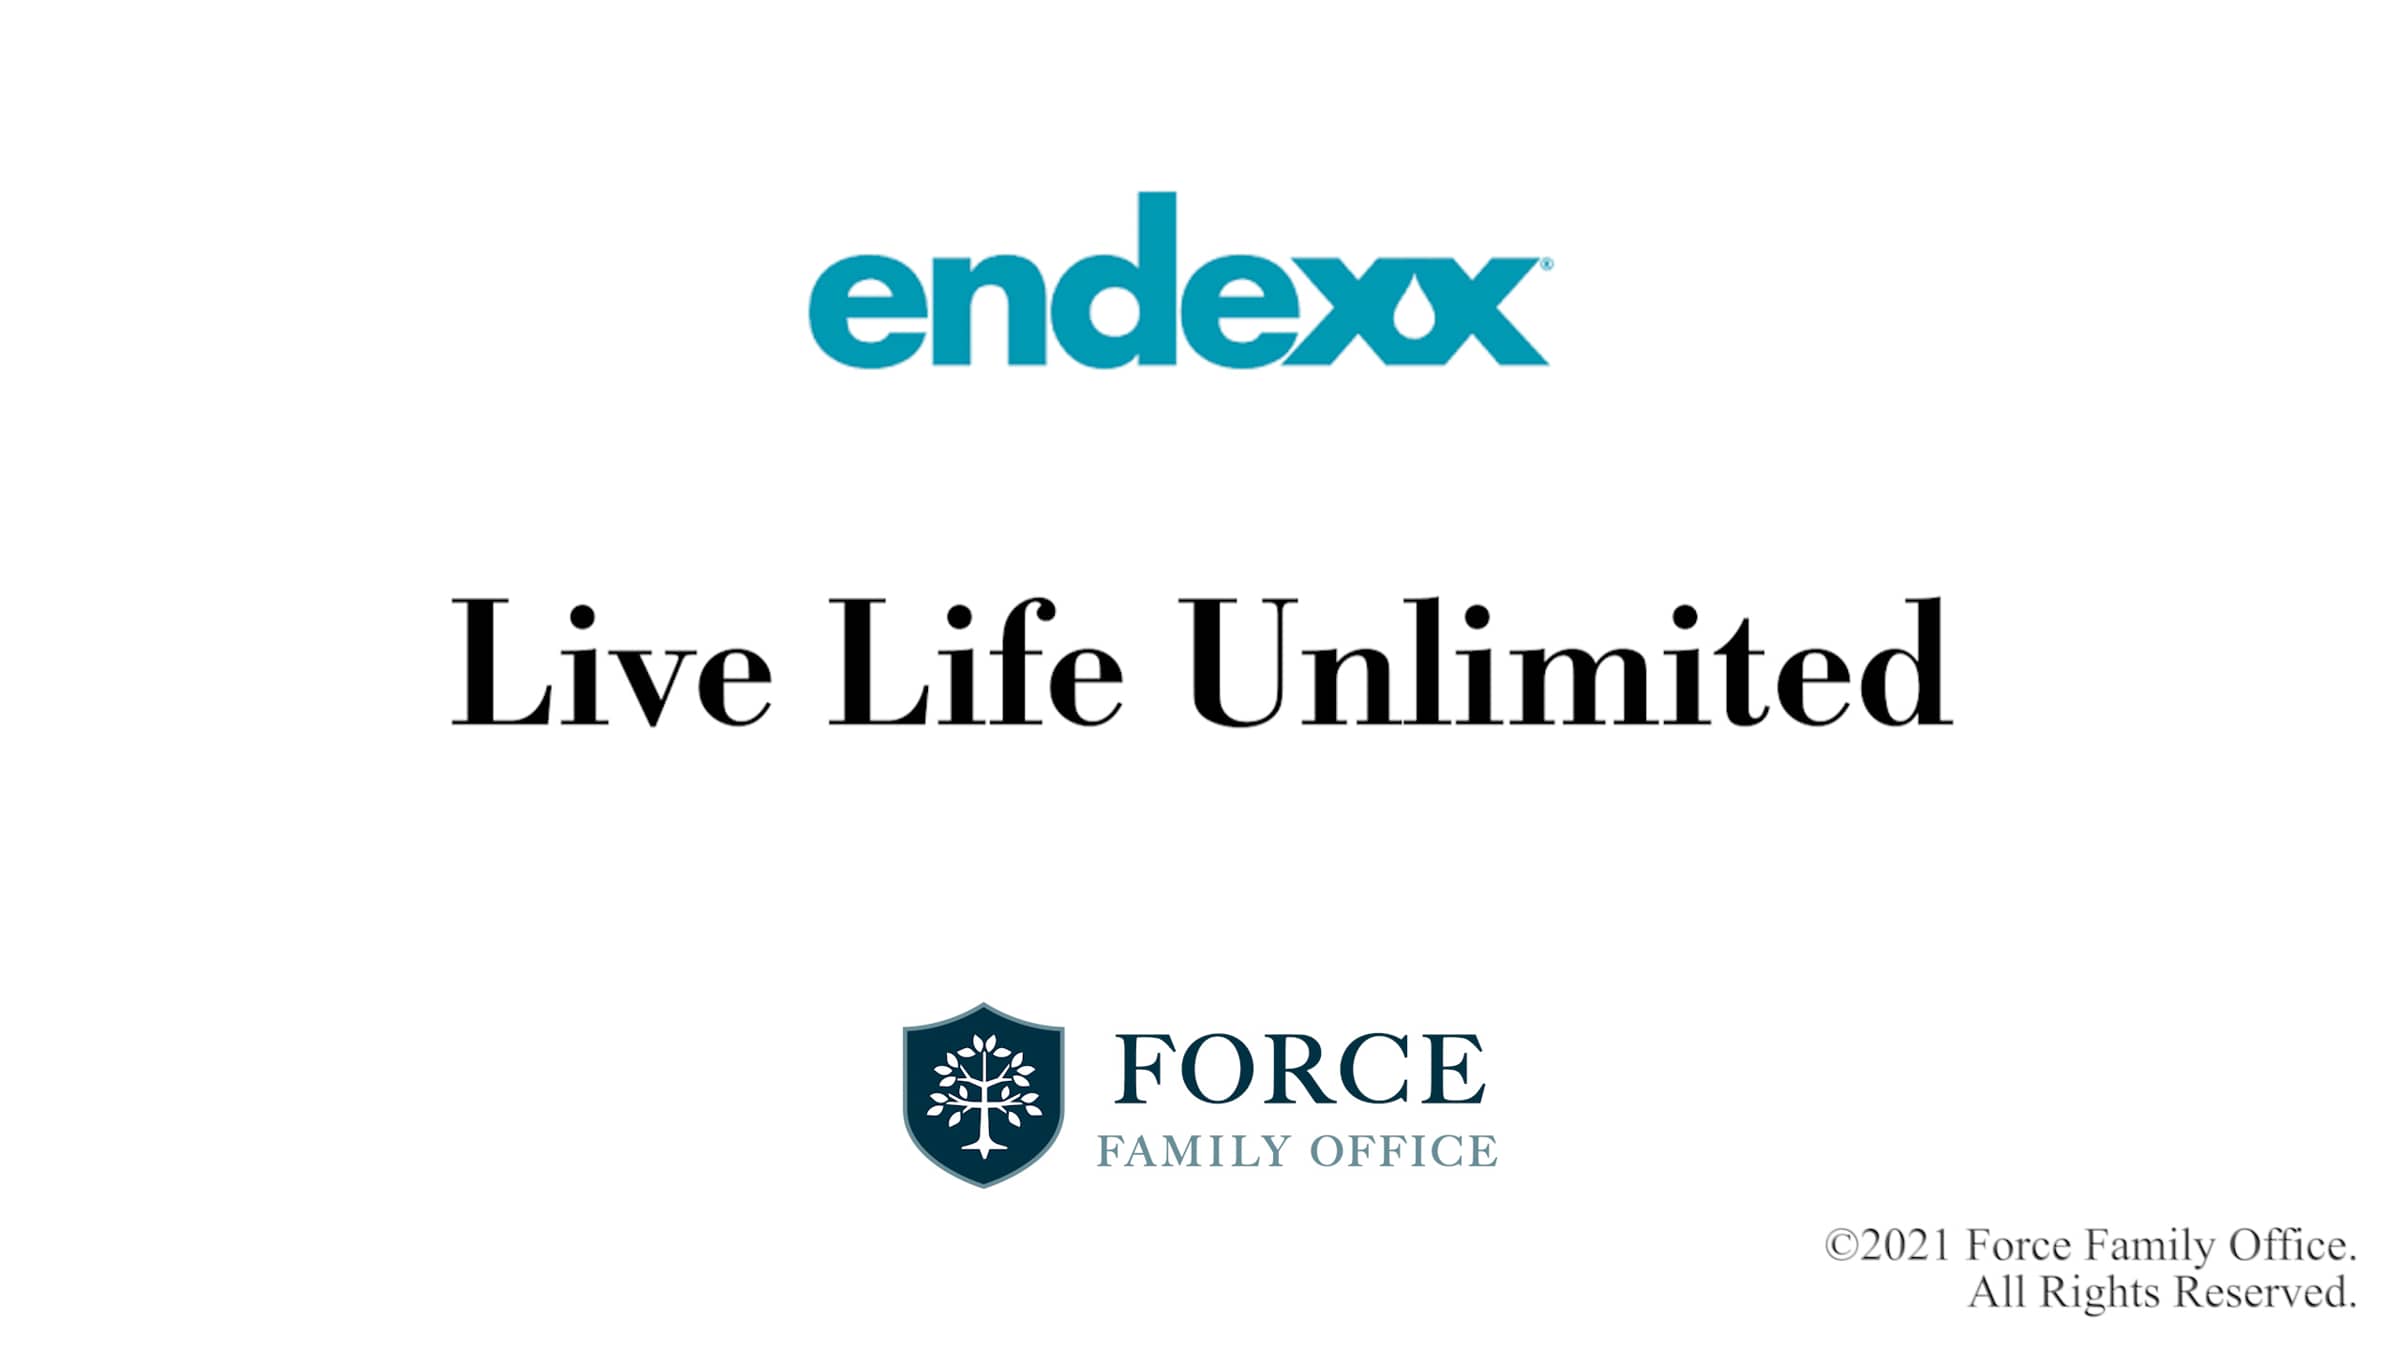 endexx - Live Life Unlimited